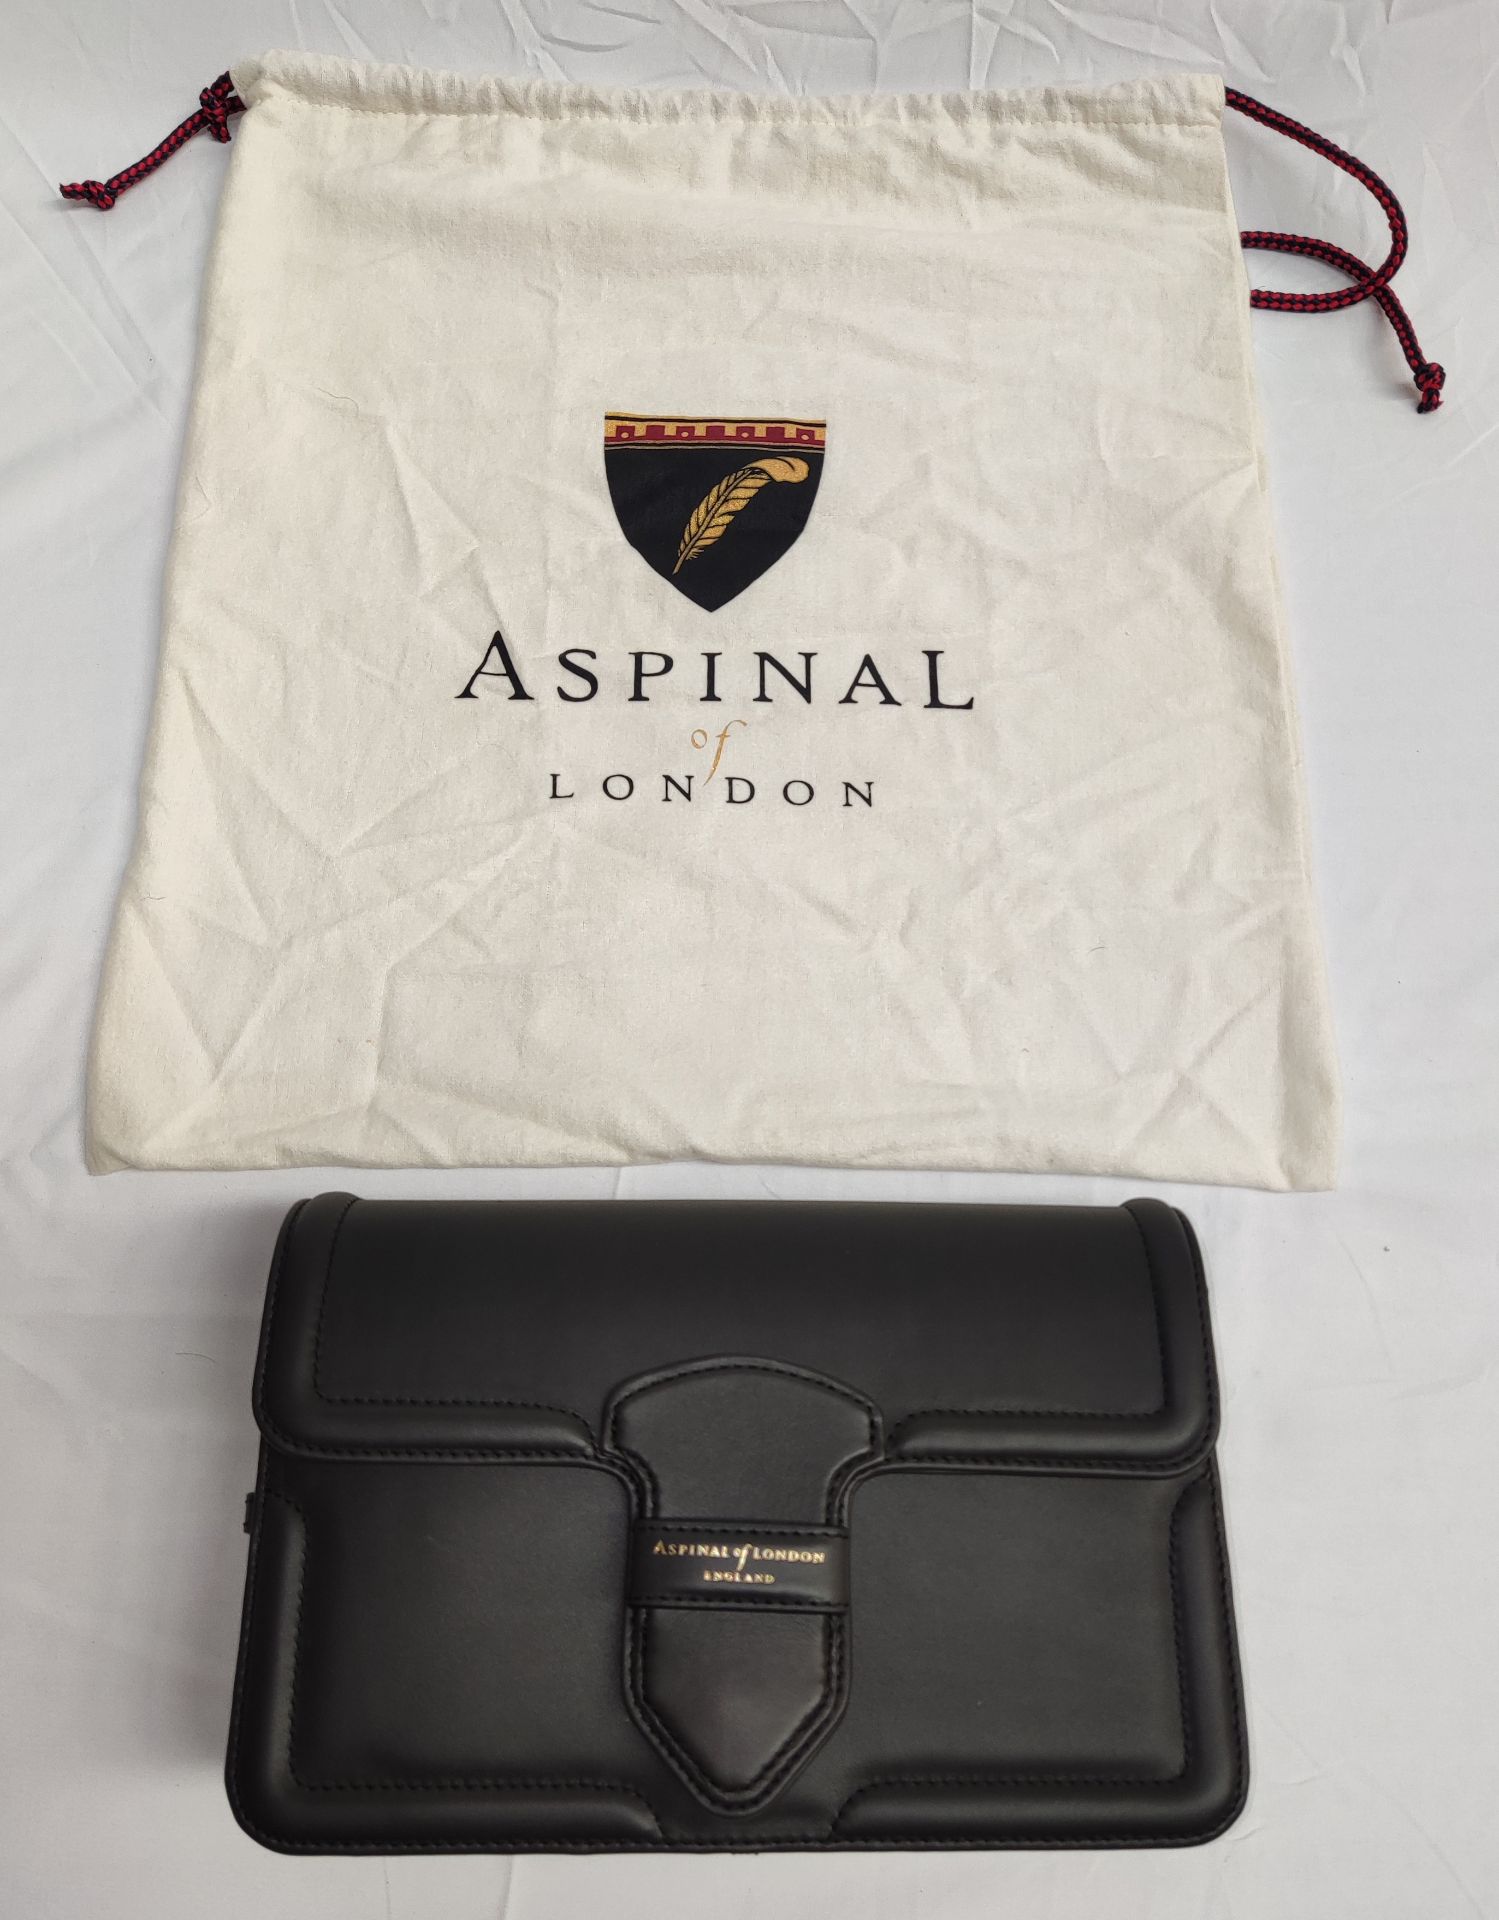 1 x ASPINAL OF LONDON The Resort Leather Bag In Smooth Black - Boxed - Original RRP £525 - Ref: - Image 2 of 24